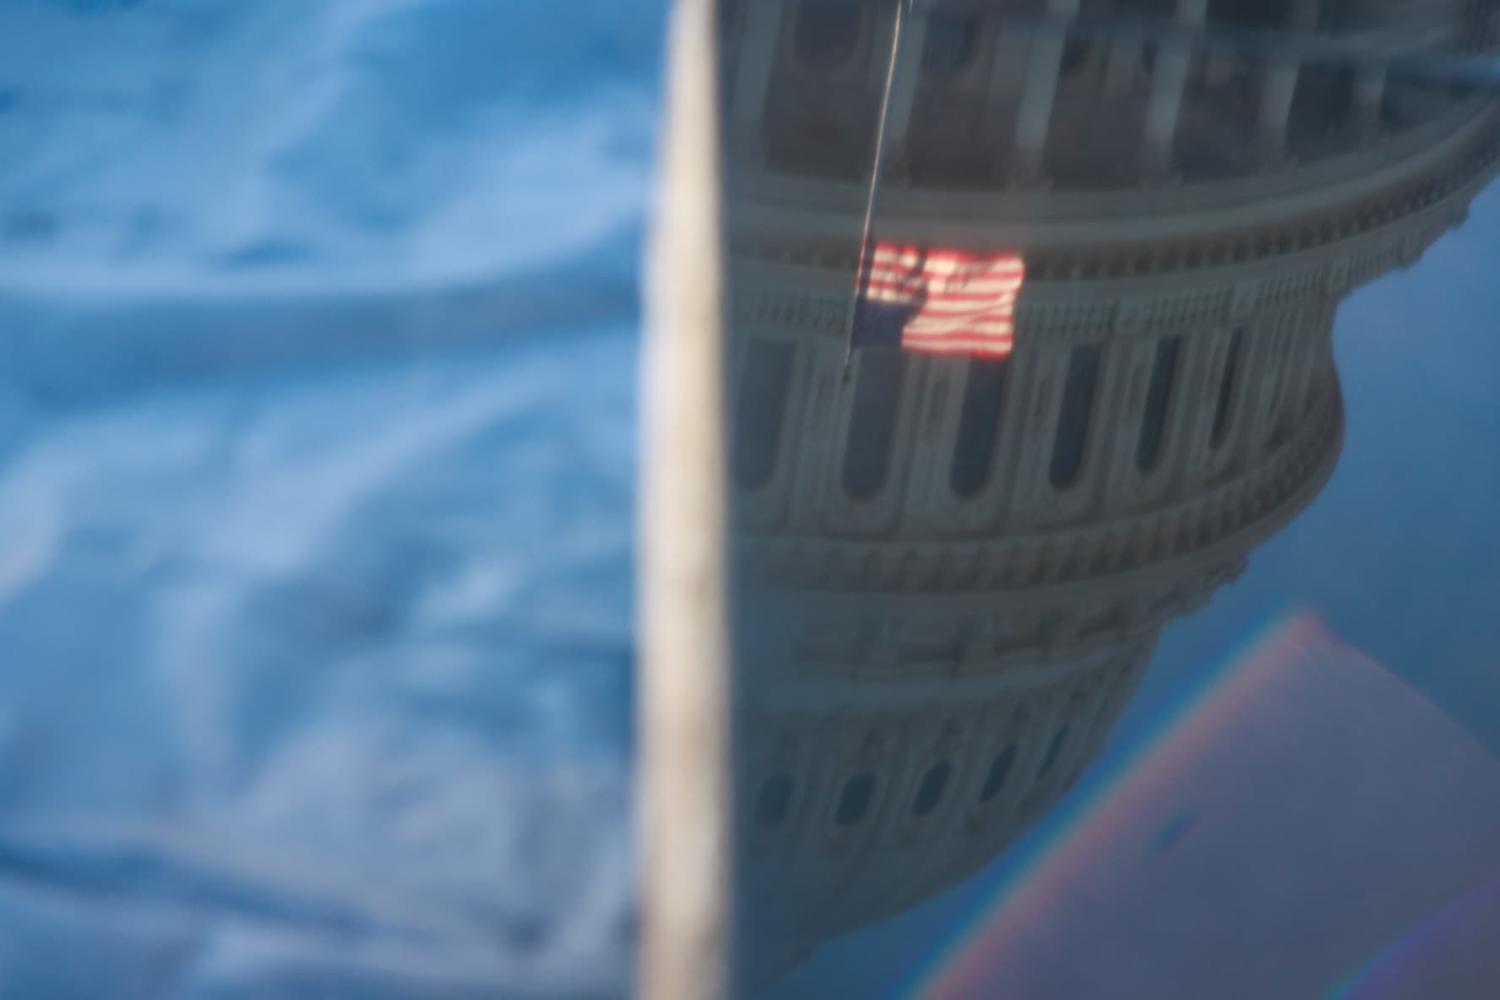 The U.S. Capitol building is seen reflected upon granite slabs during construction on Capitol grounds in Washington, D.C. on January 11, 2024. (Photo by Bryan Olin Dozier/NurPhoto)